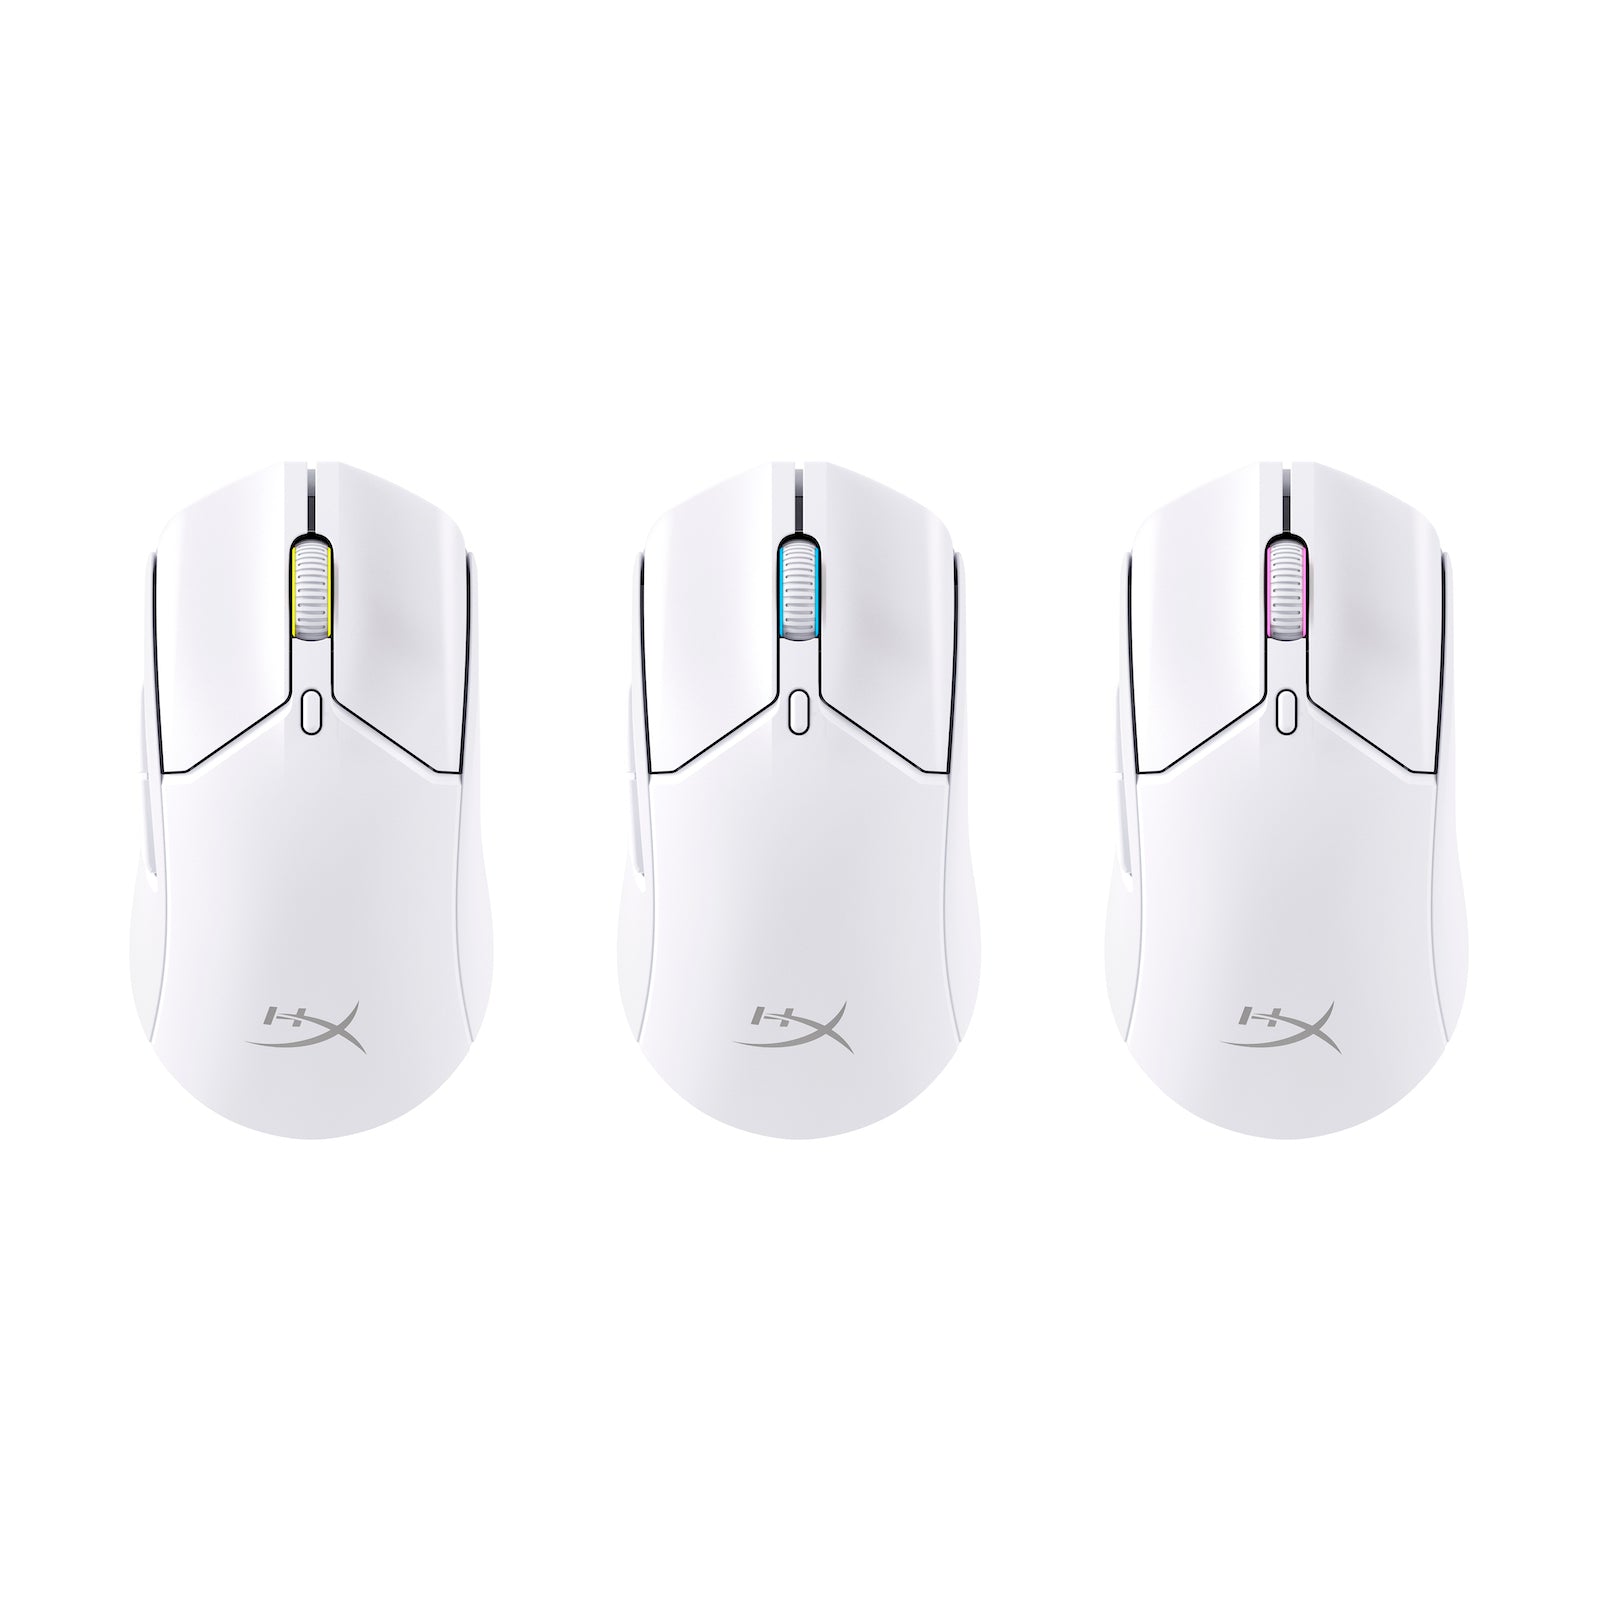 HyperX Pulsefire Haste 2 Wireless White Gaming Mouse - showing RGB effects